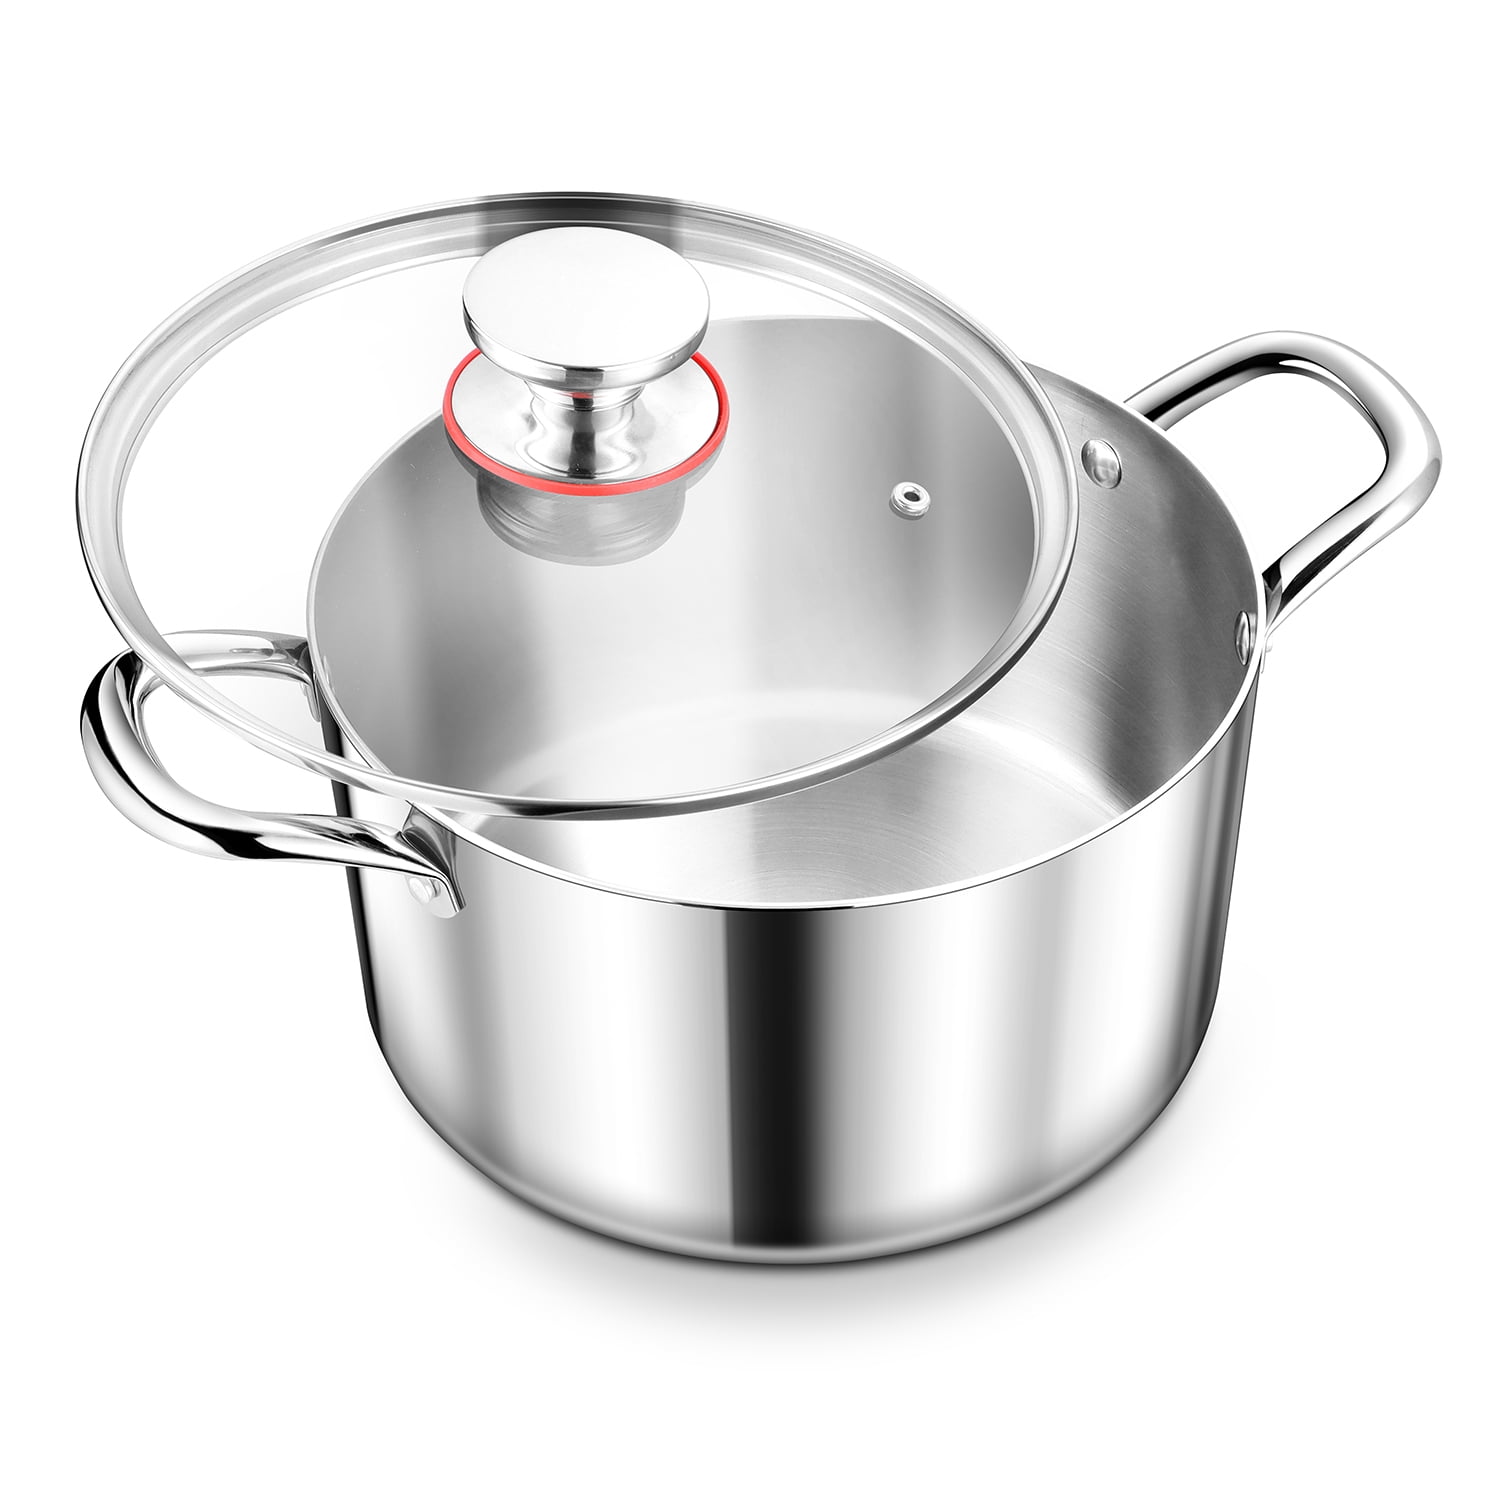 DELARLO Tri-ply Stainless Steel StockPot 5QT, Induction Cooking Pot 18/8  Stockpots Food Grade, Durable Soup Pot Stew Simmering Pot with Glass Lid